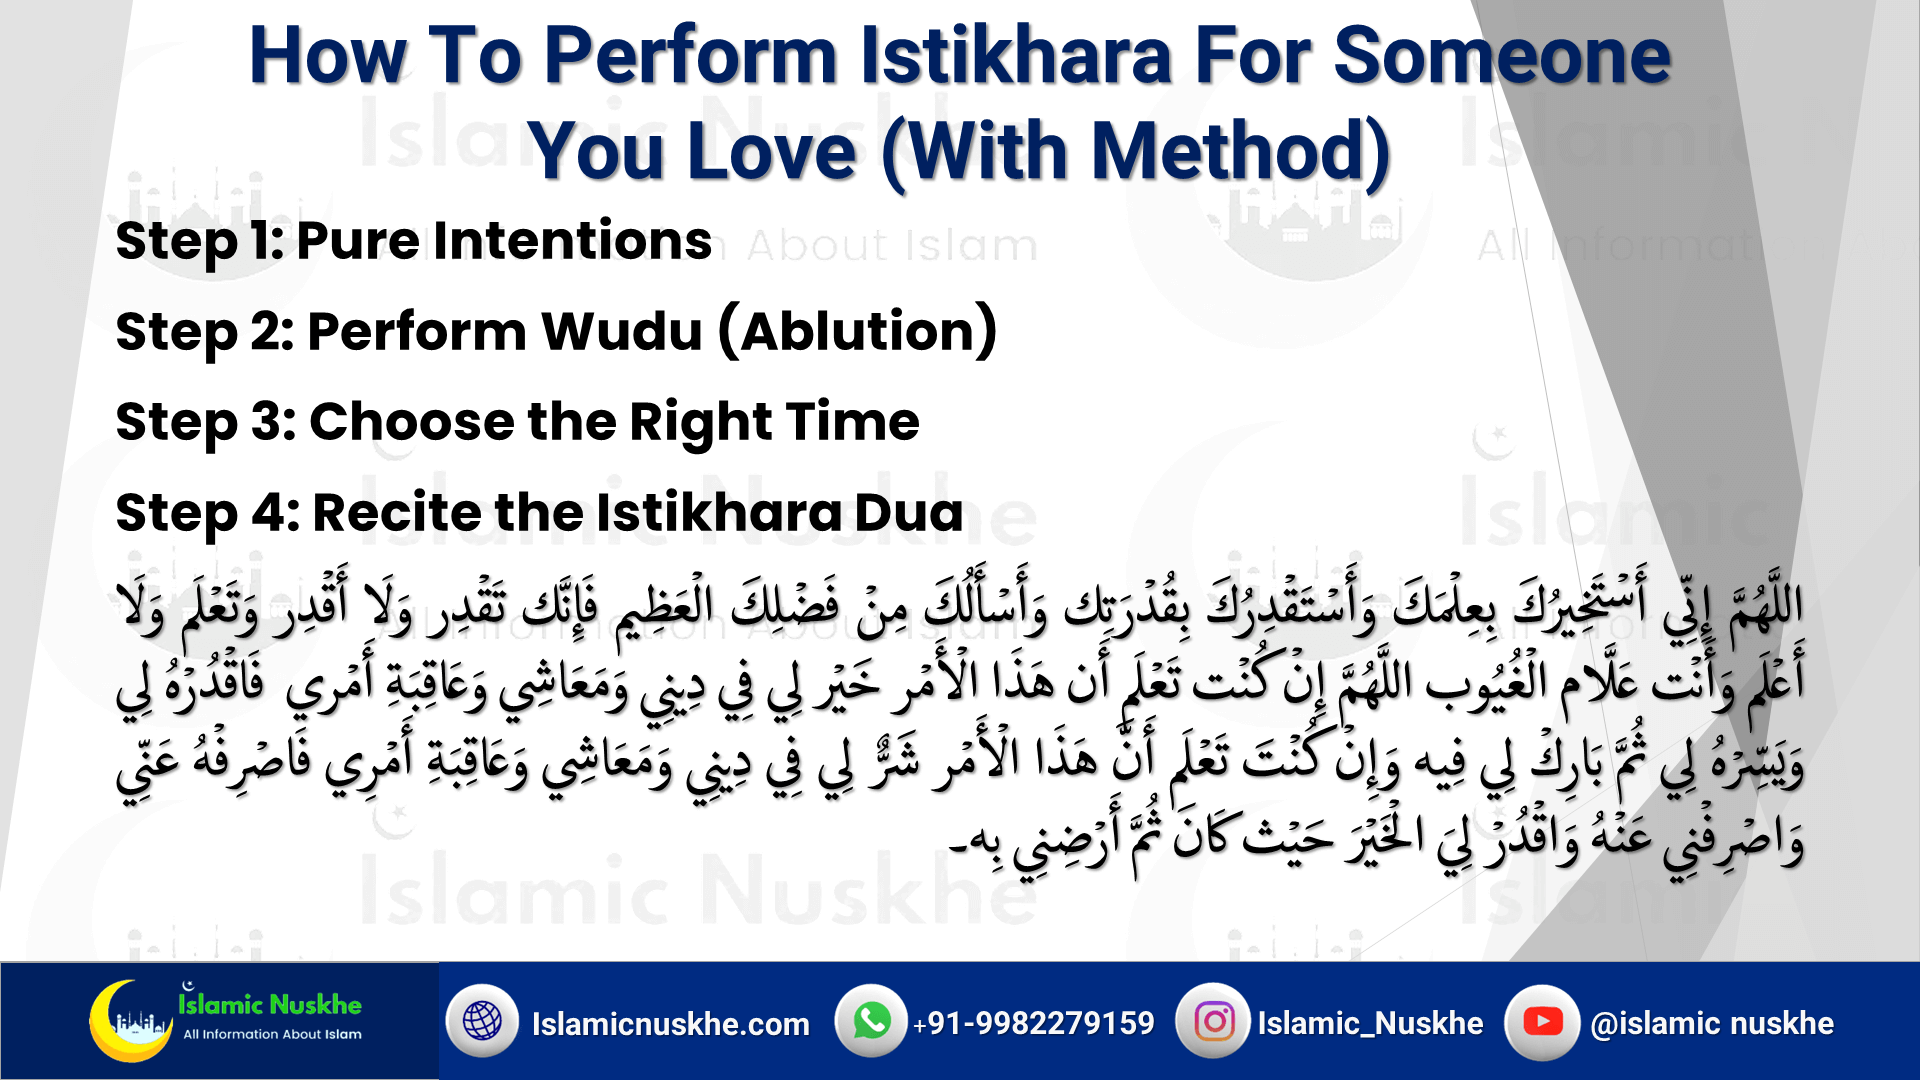 How To Perform Istikhara For Someone You Love (Step-By-Step Guide)